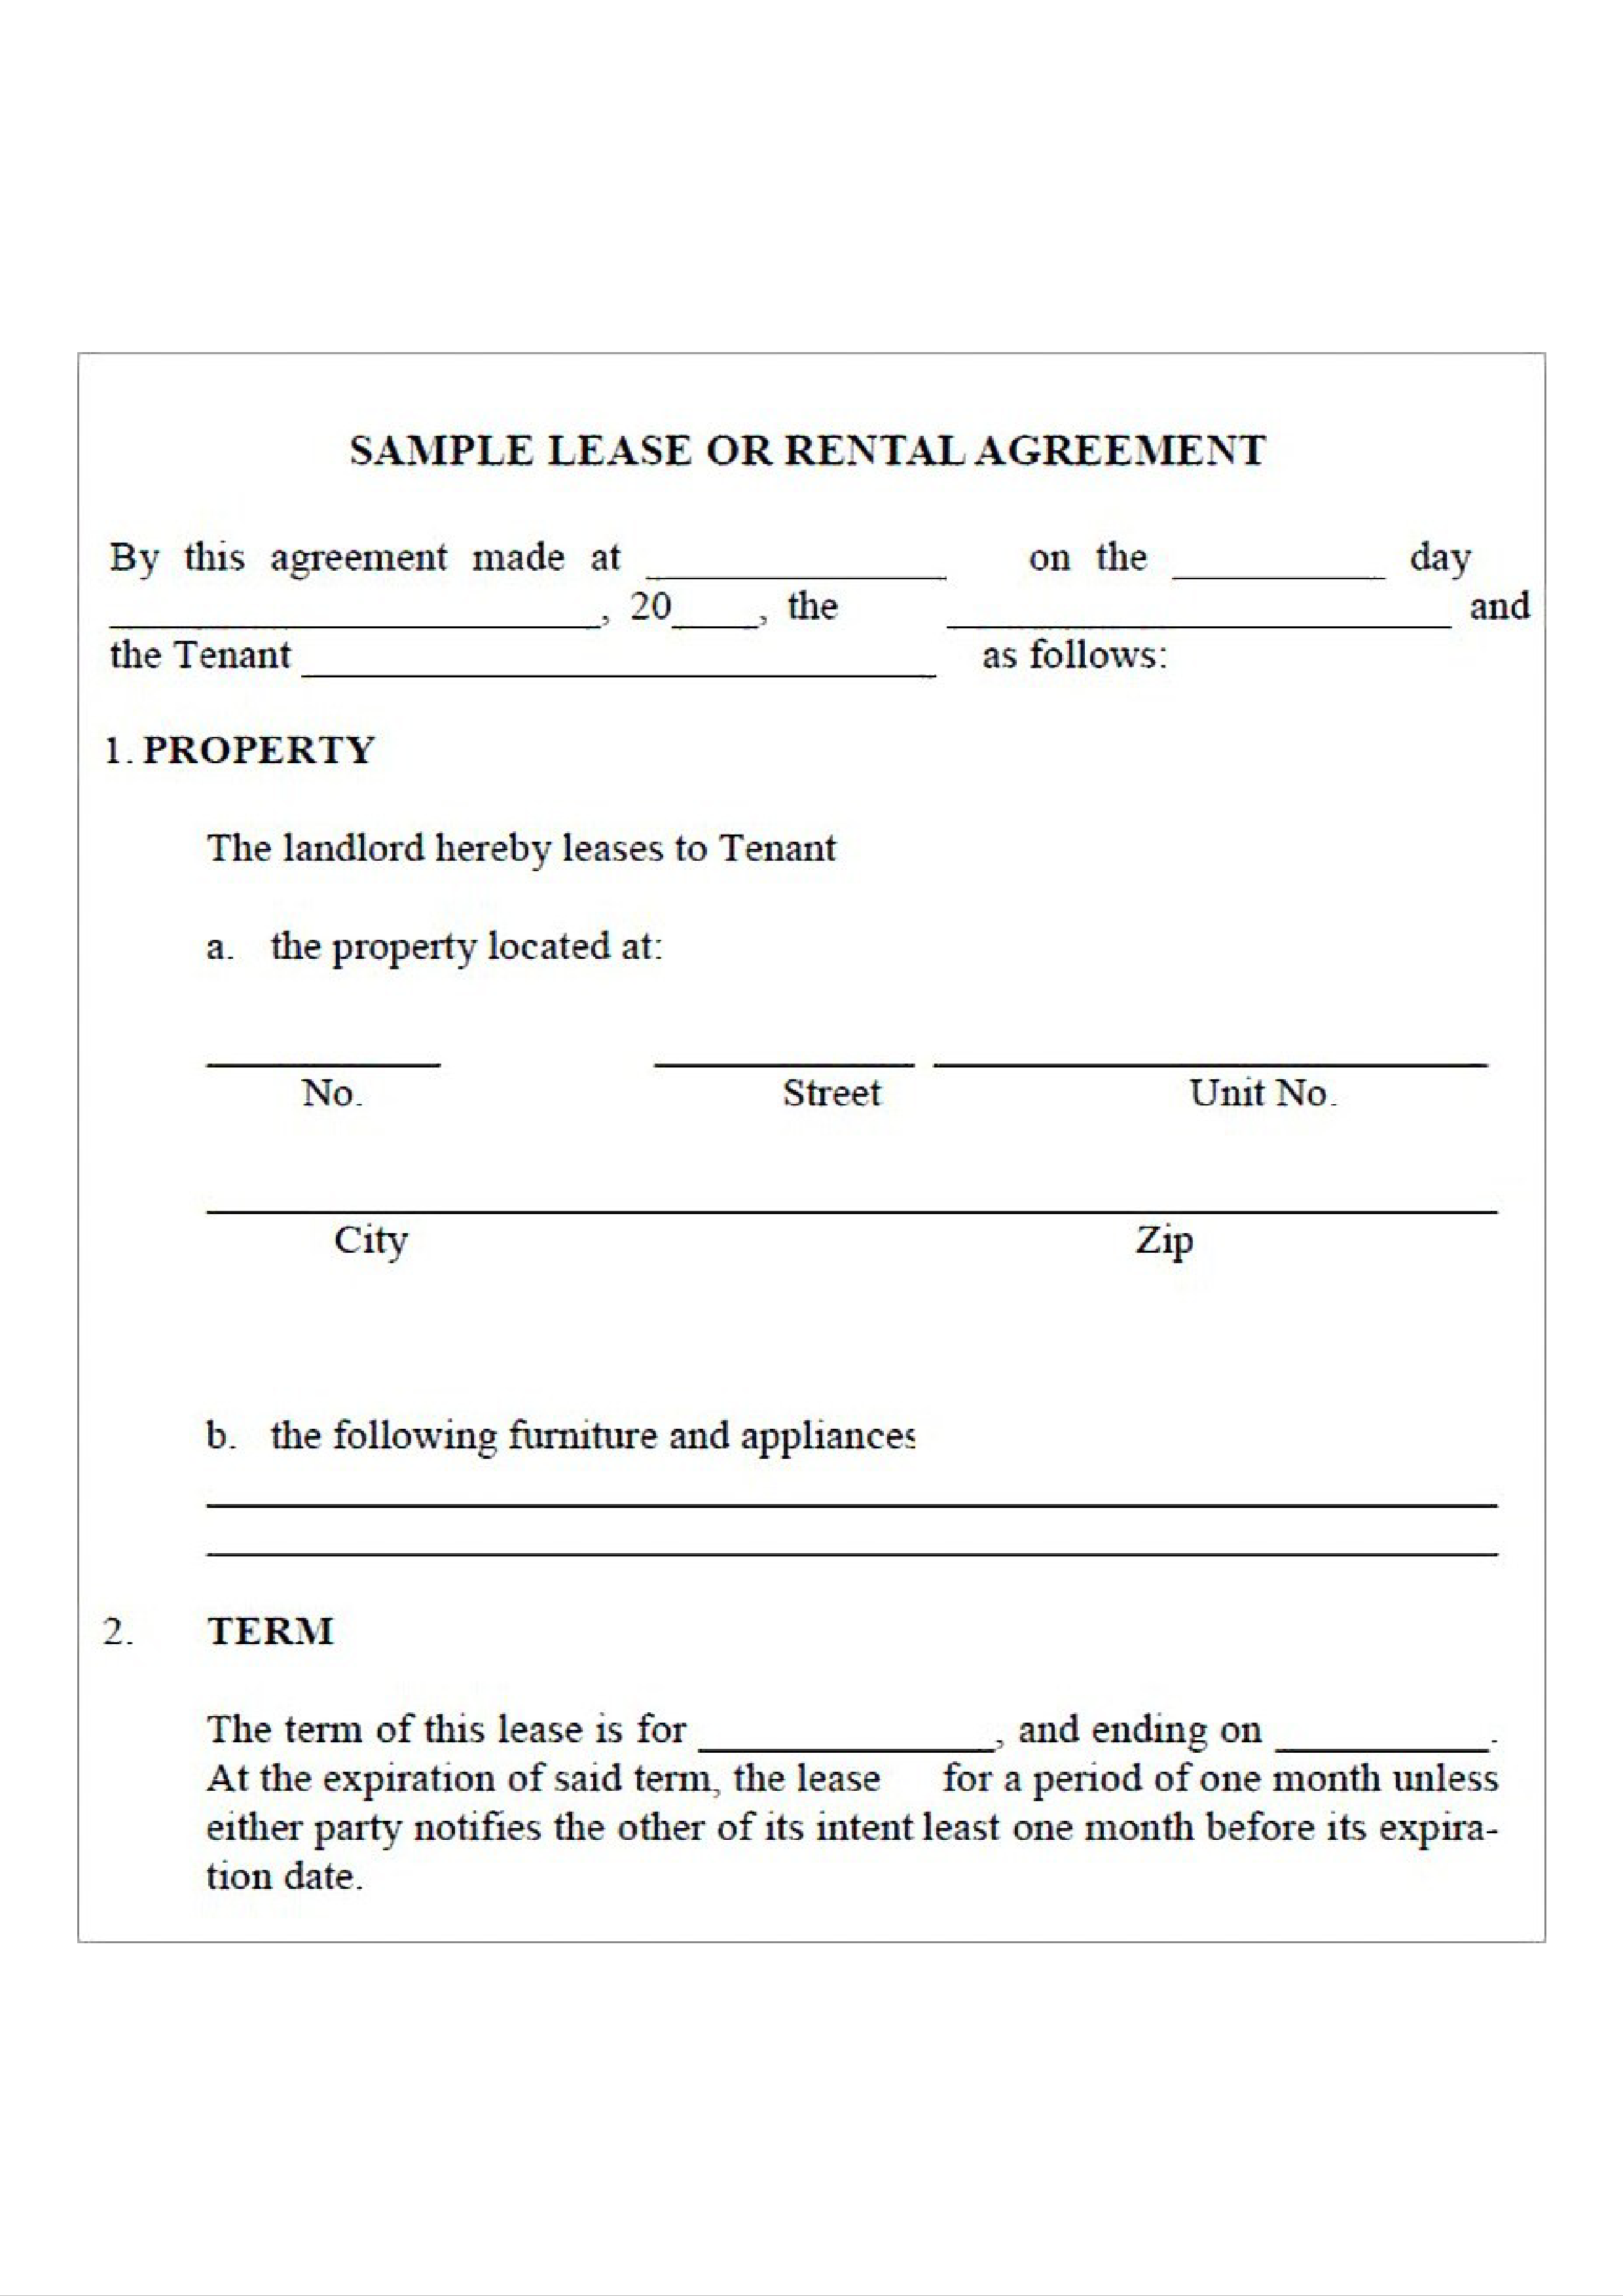 lease-agreement-letter-template